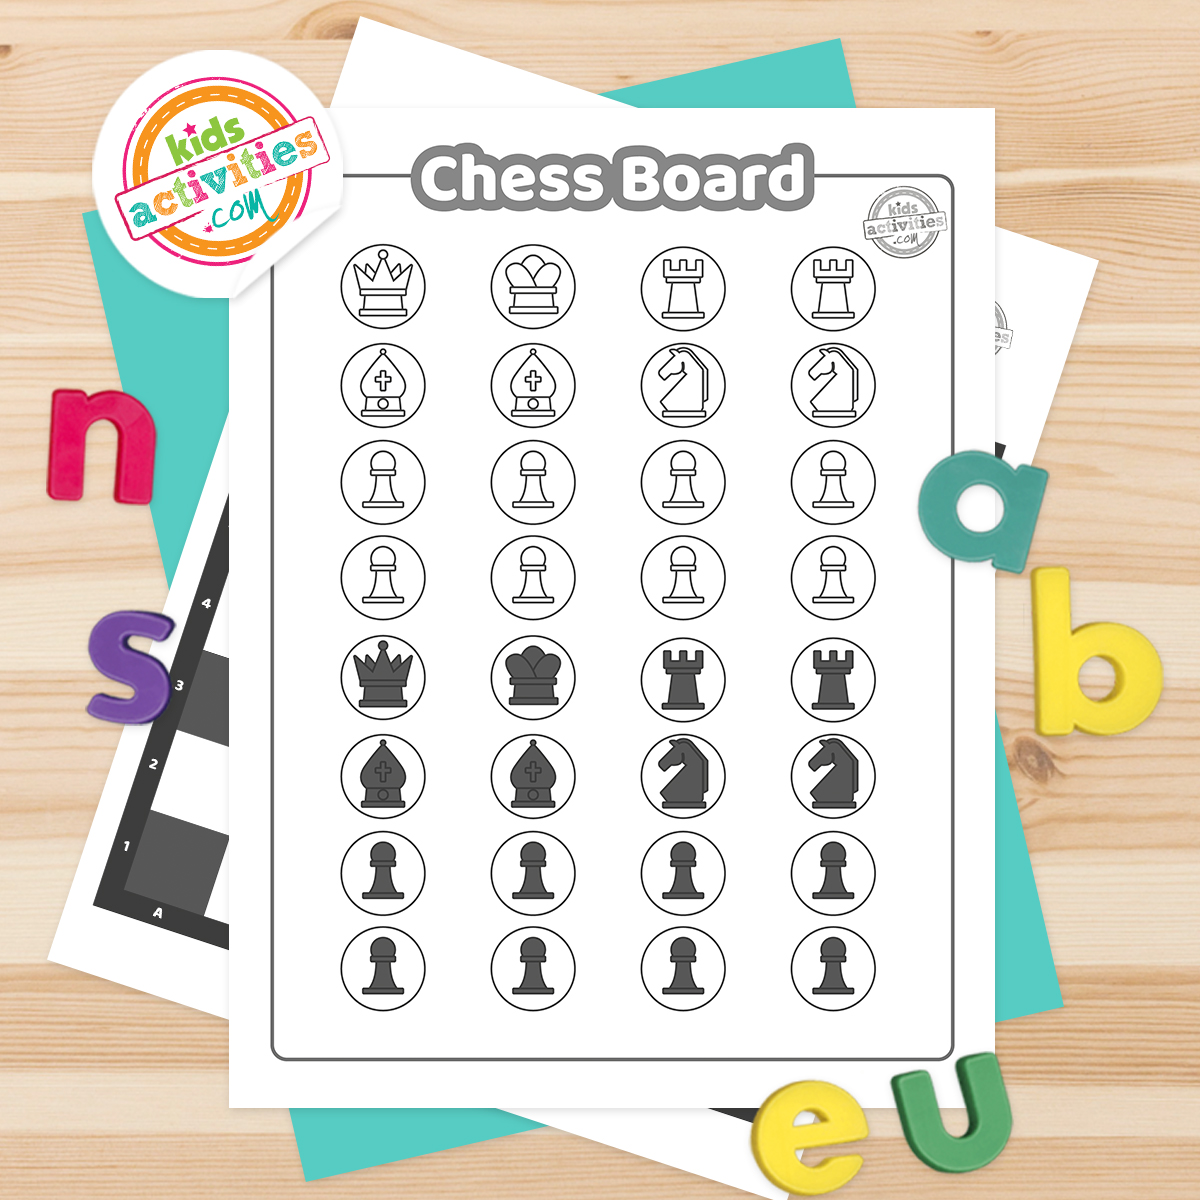 Black & white printable chess set pages on top of a turquoise page laying on a wooden surfaces with colorful letters scattered around.